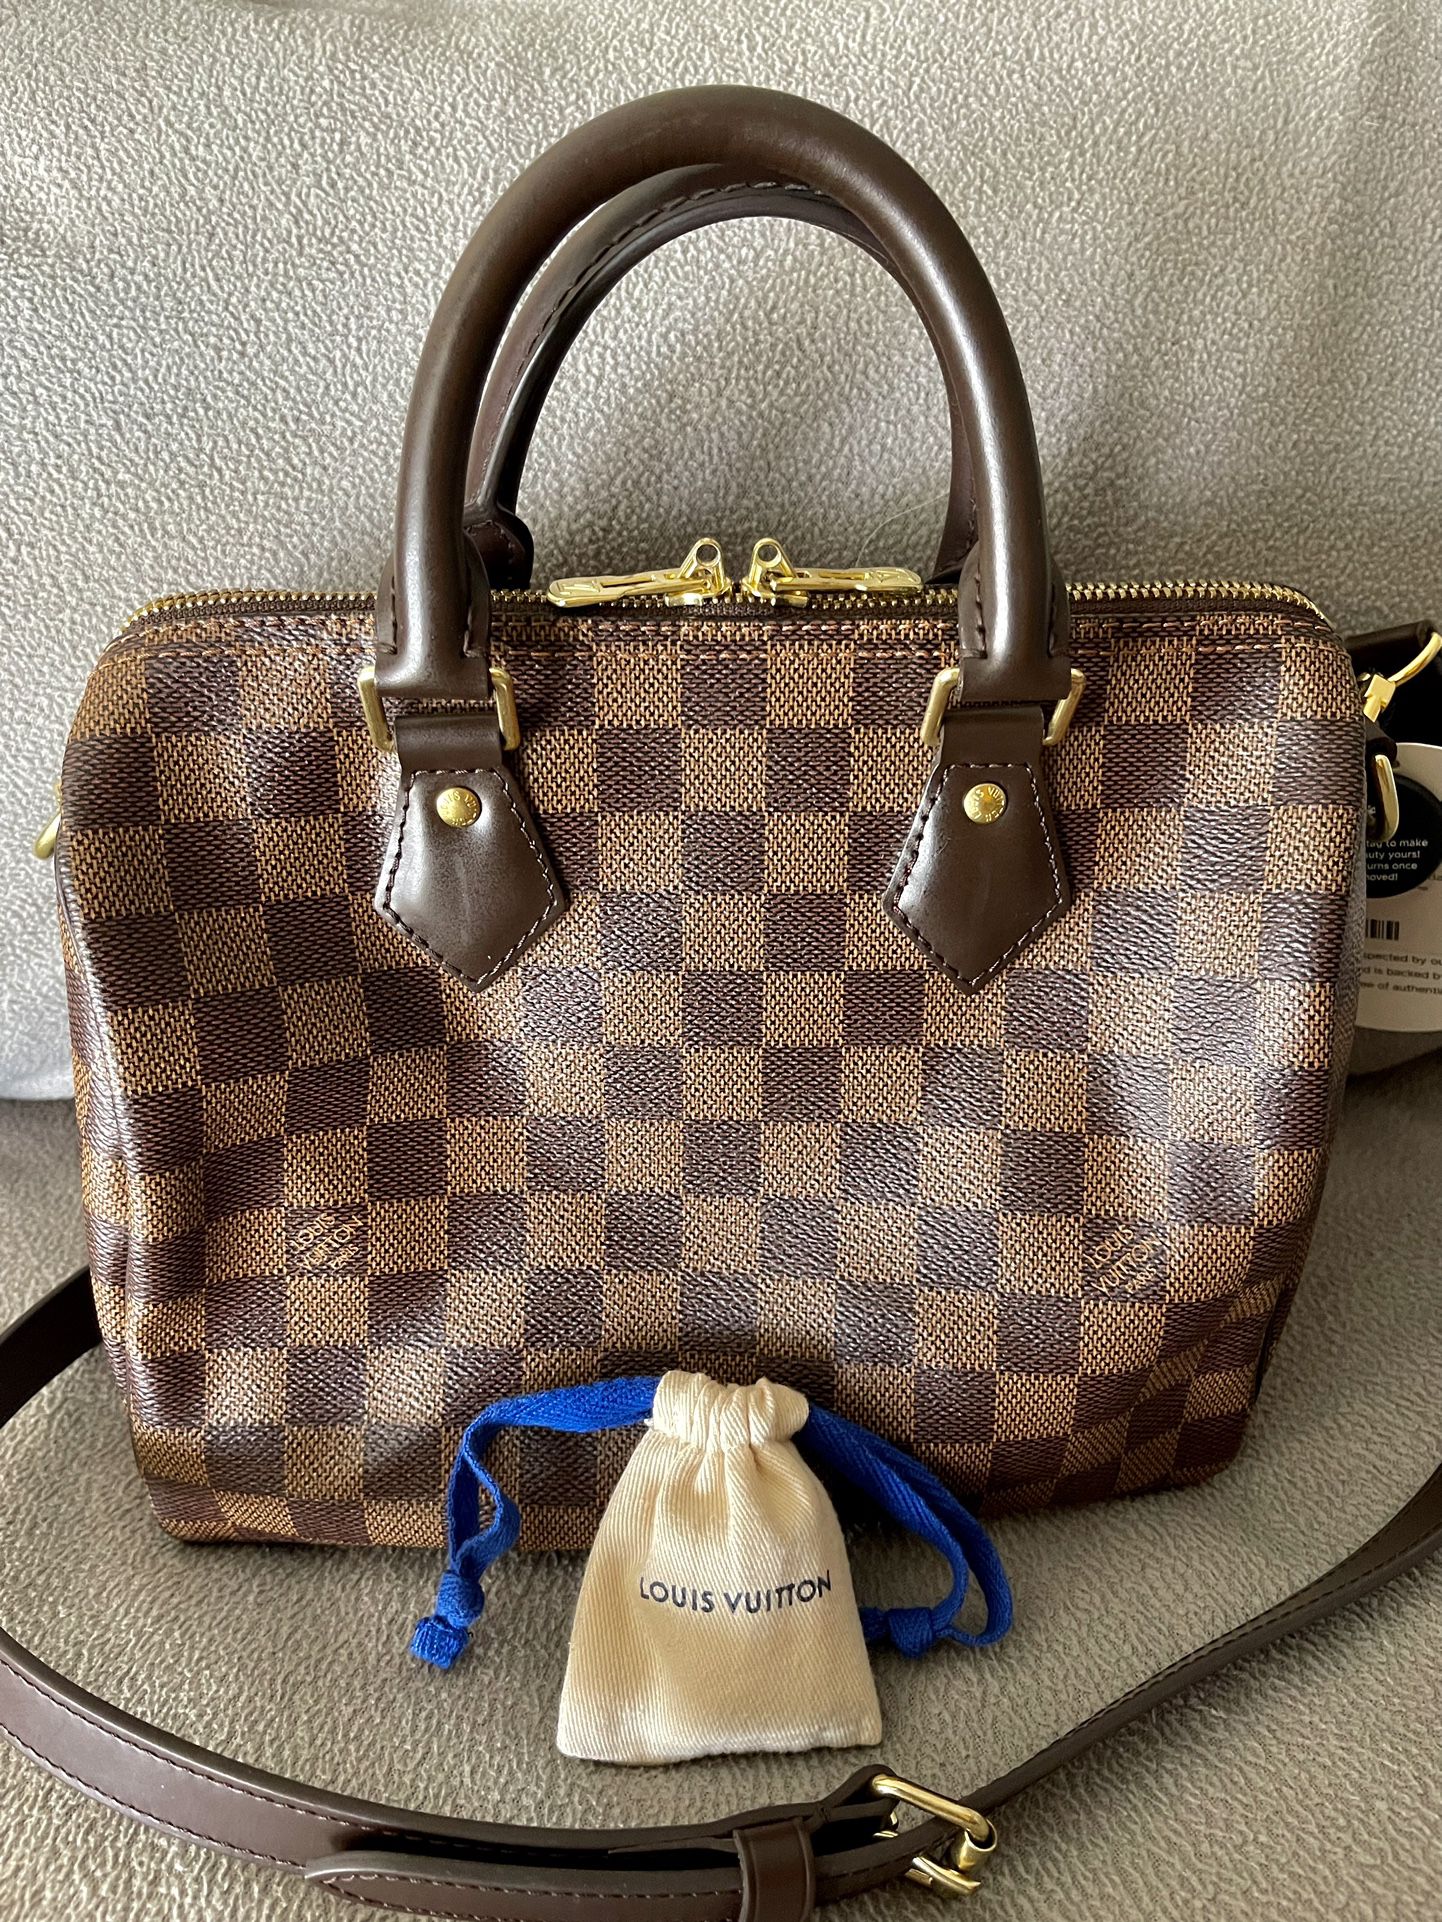 louis vuitton speedy 25 damier Great Condition for Sale in